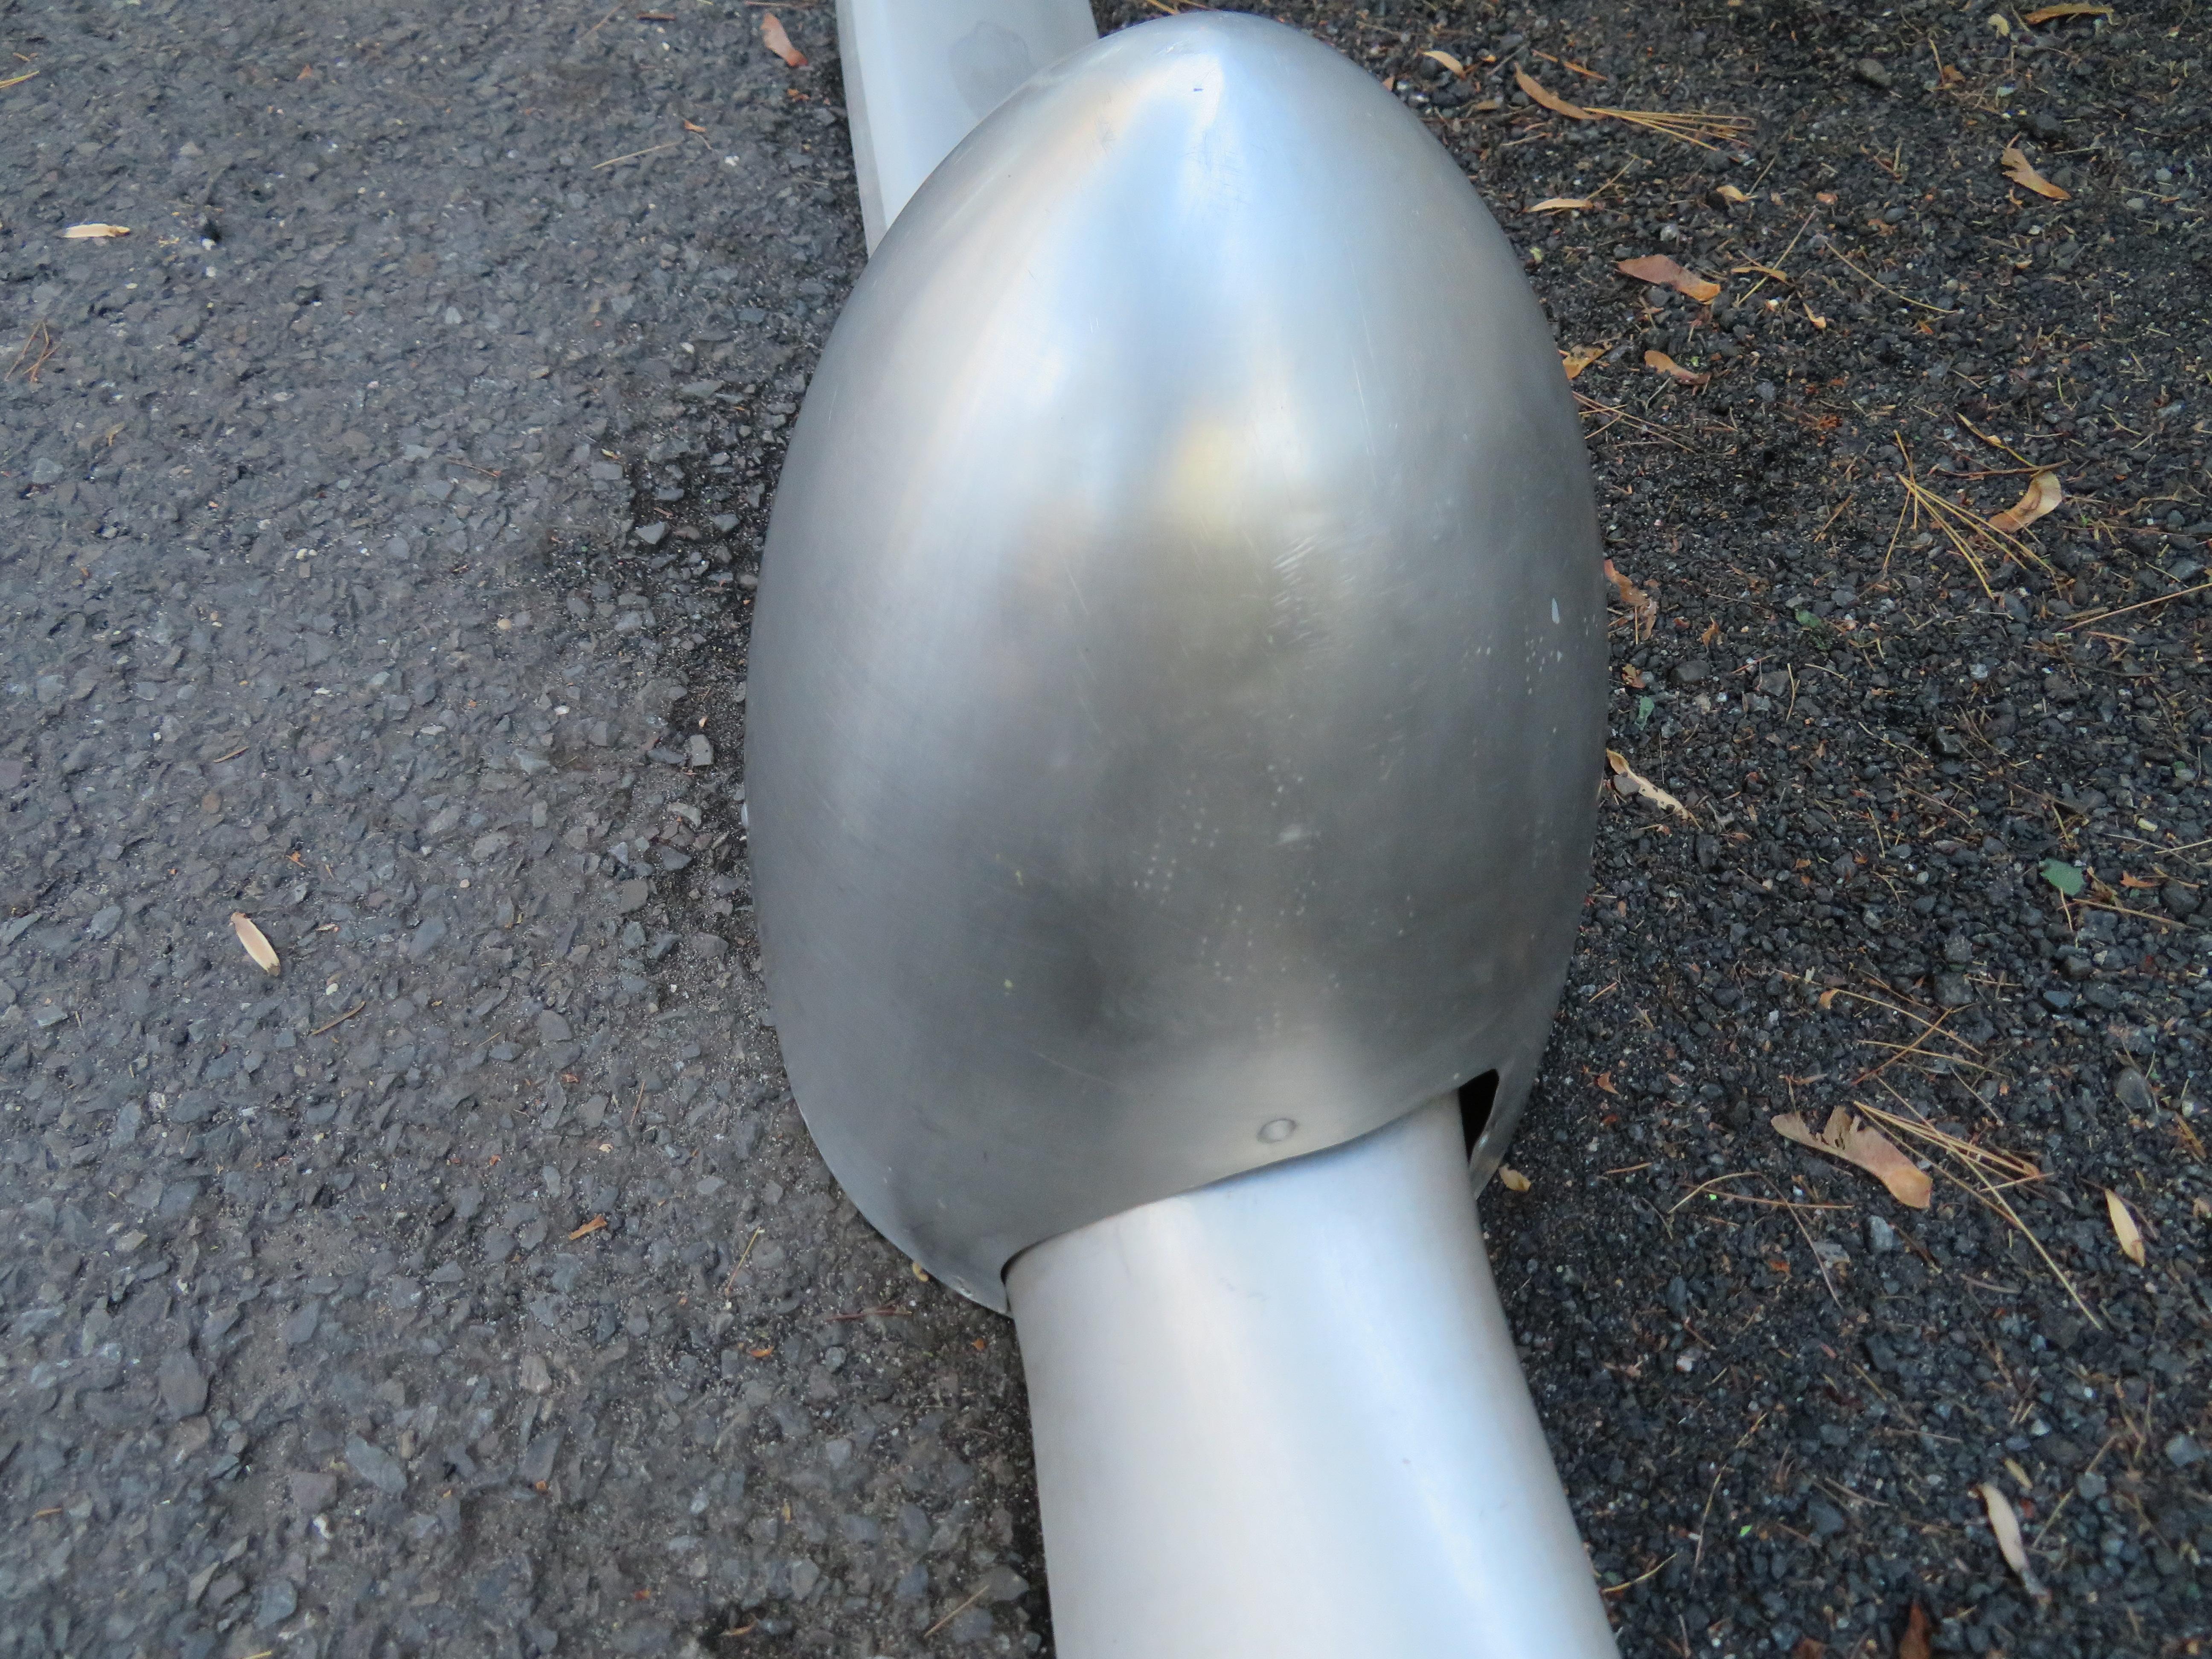 Antique Original Midcentury Metal Airplane Propellor with Nosecone In Good Condition For Sale In Pemberton, NJ